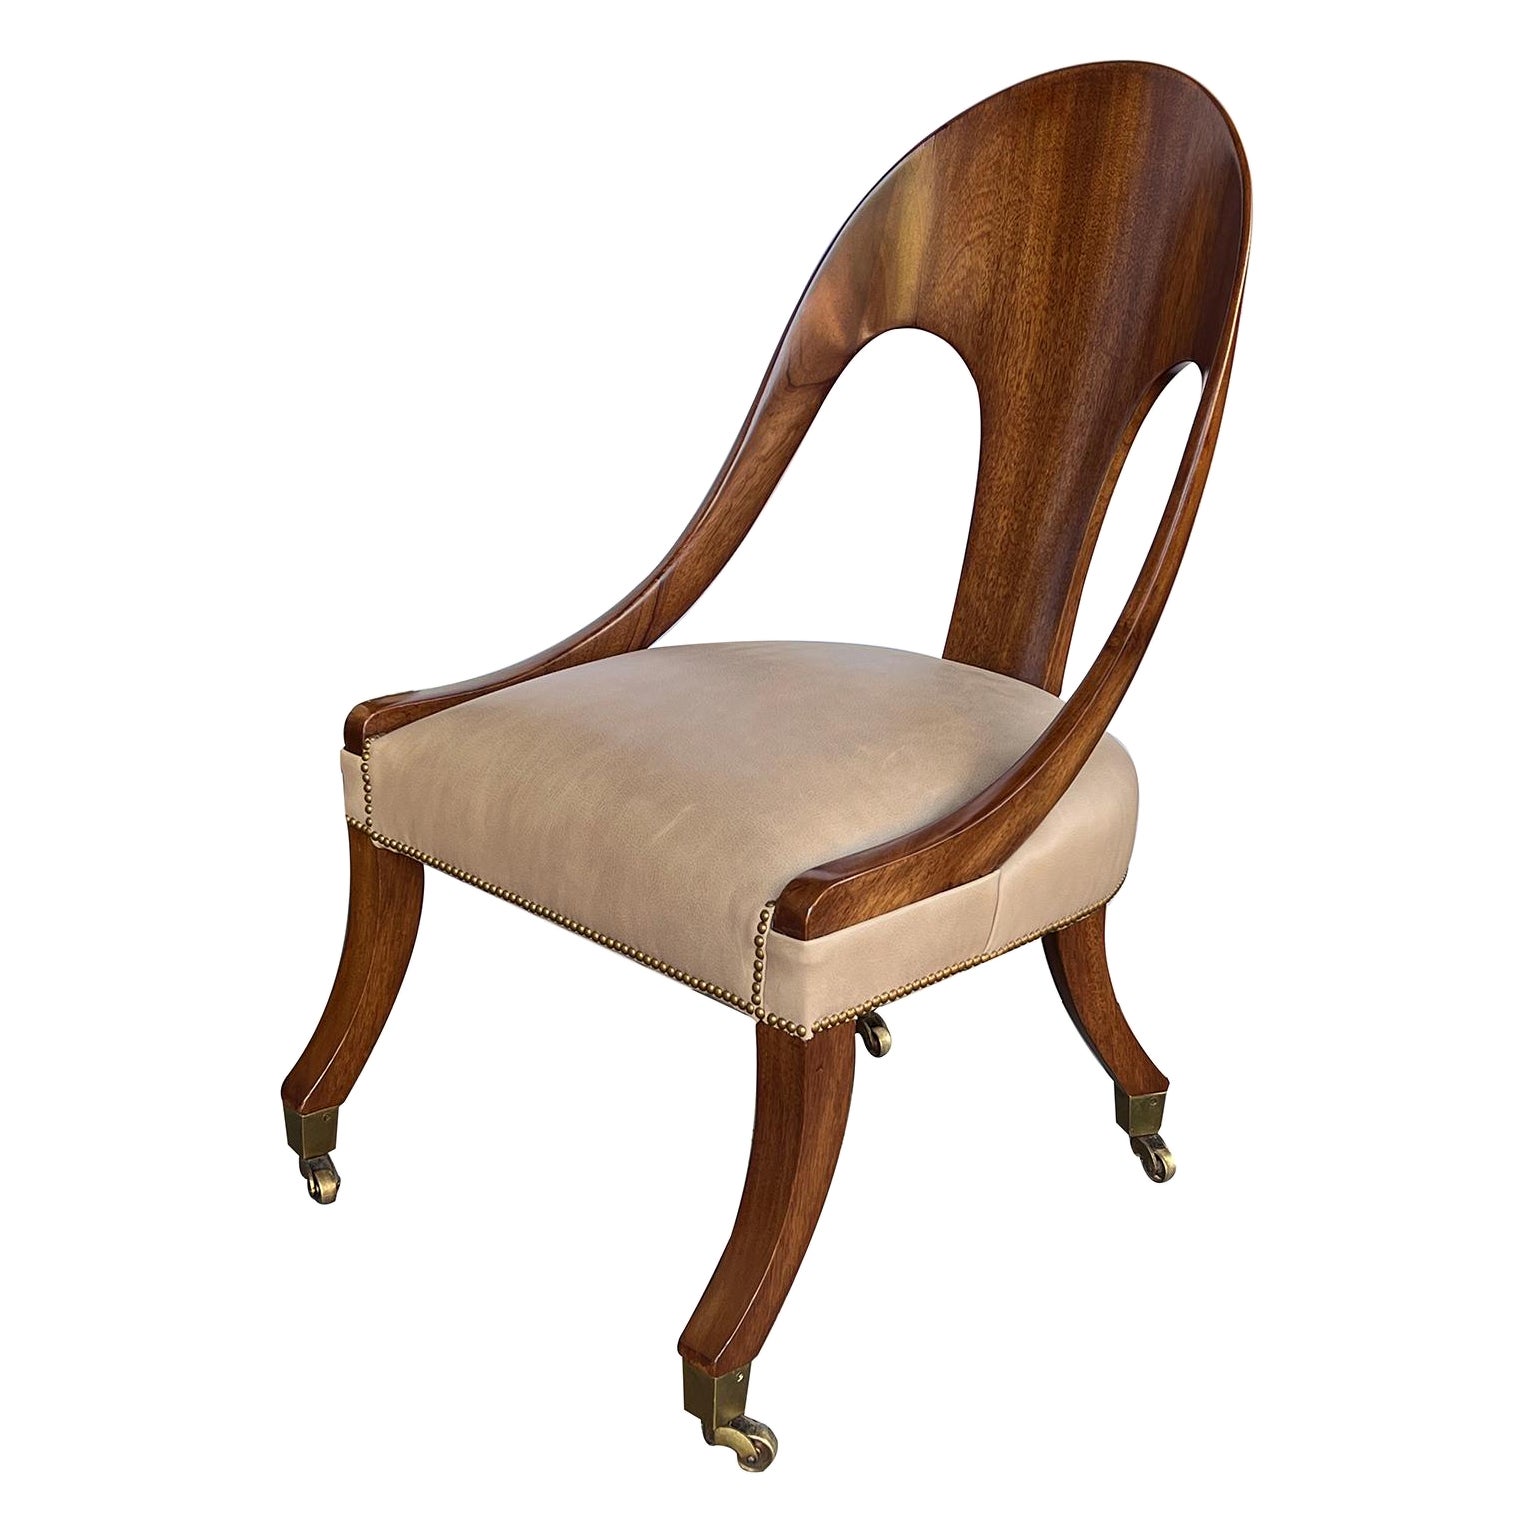 Shapely English Regency Style Solid Mahogany Spoonback Chair For Sale